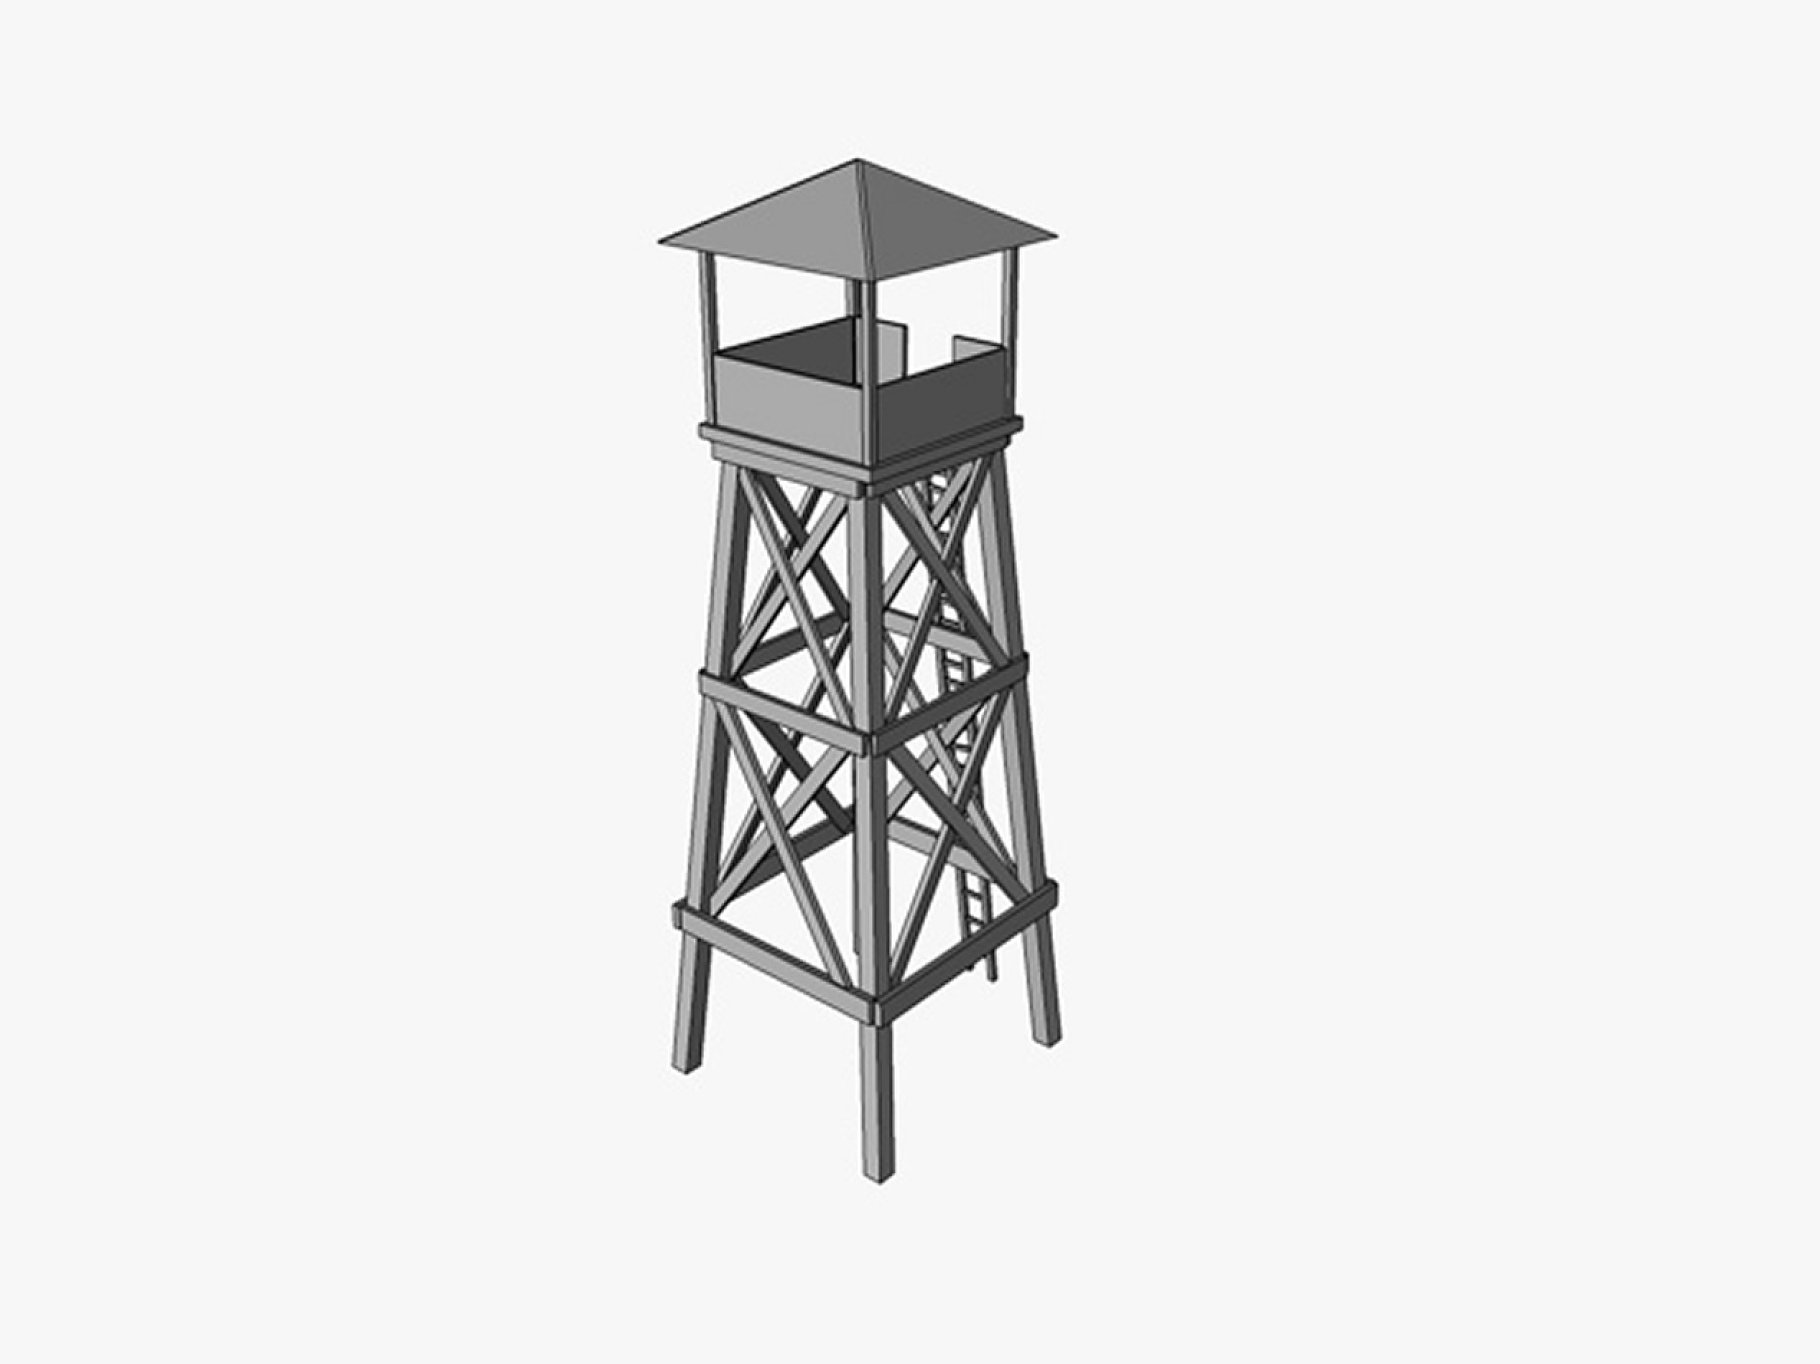 Back gray mockup of low poly watchtower on a gray background.